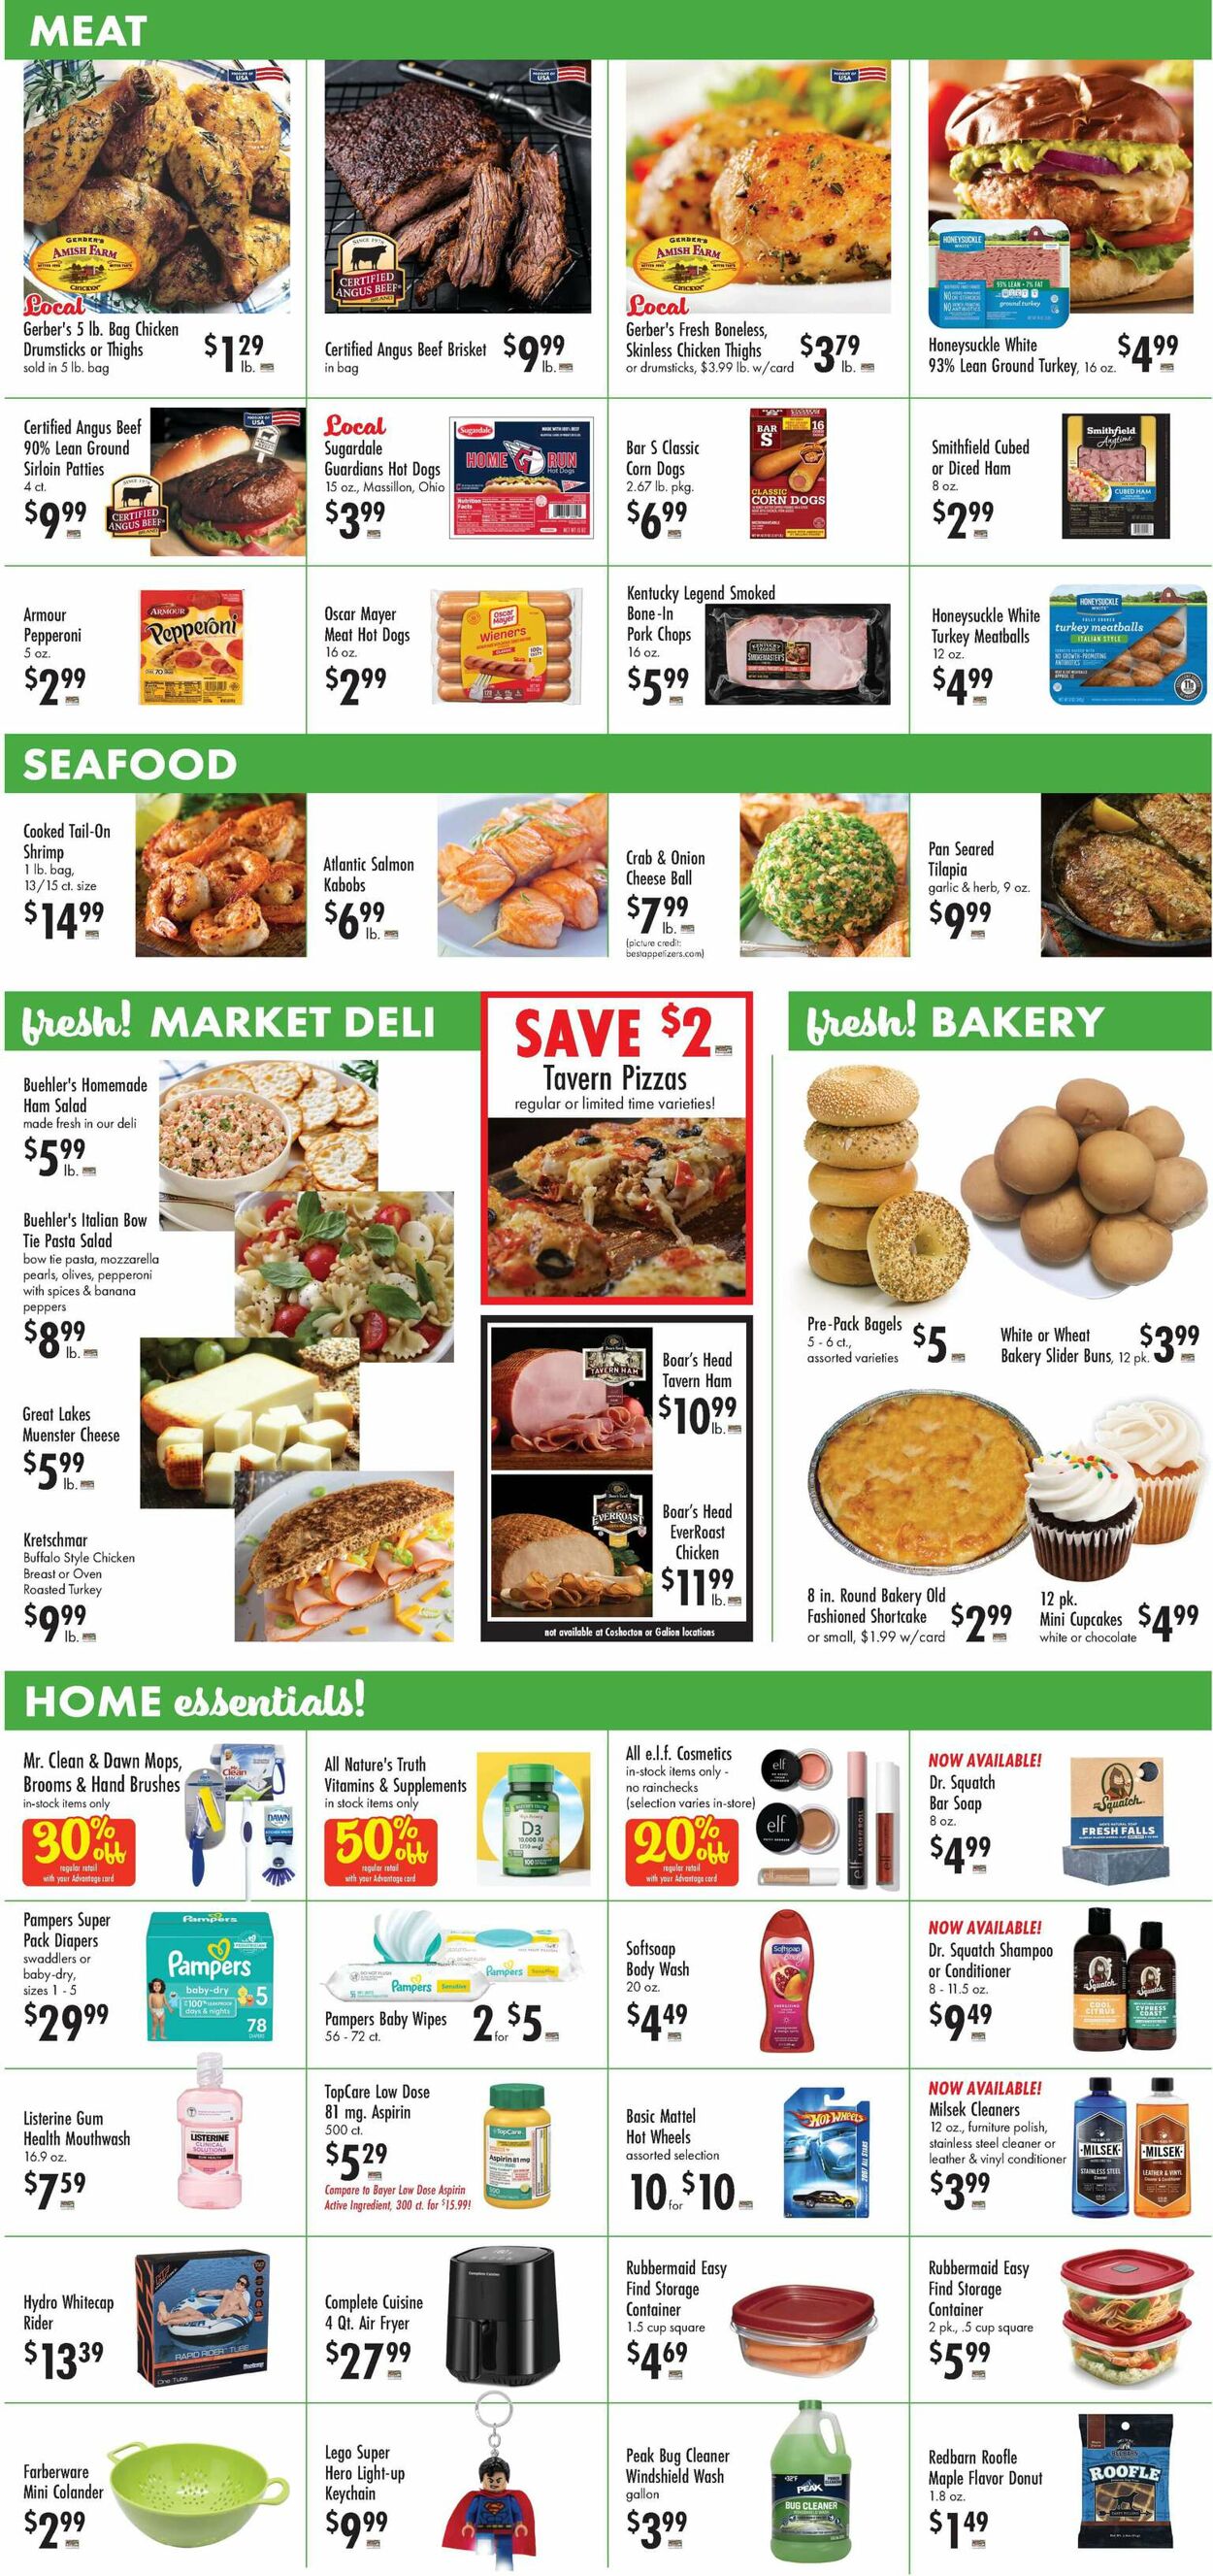 Catalogue Buehler's Fresh Foods from 06/19/2024